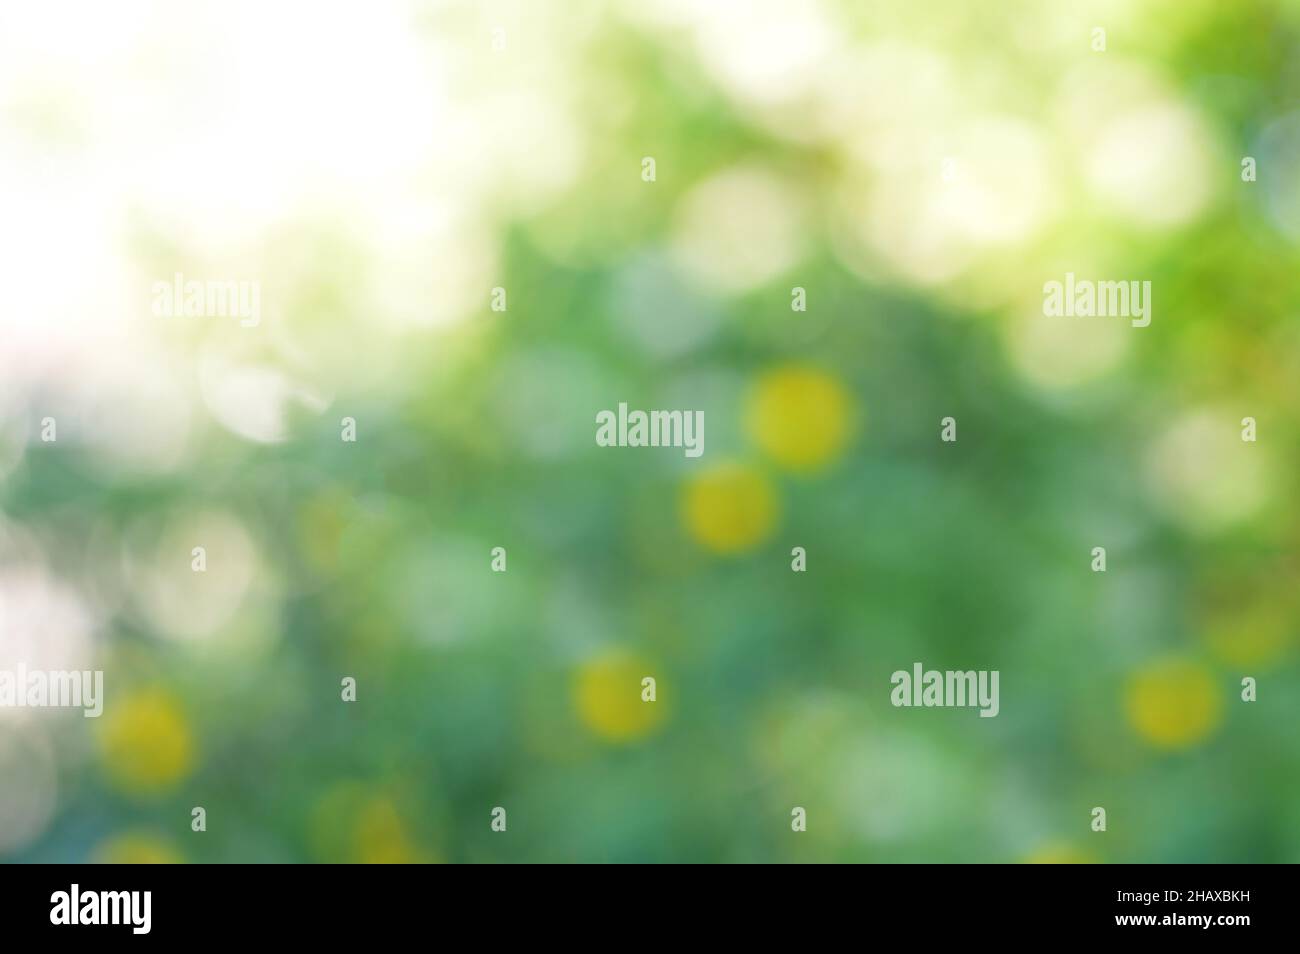 Abstract blurred green nature background Stock Photo